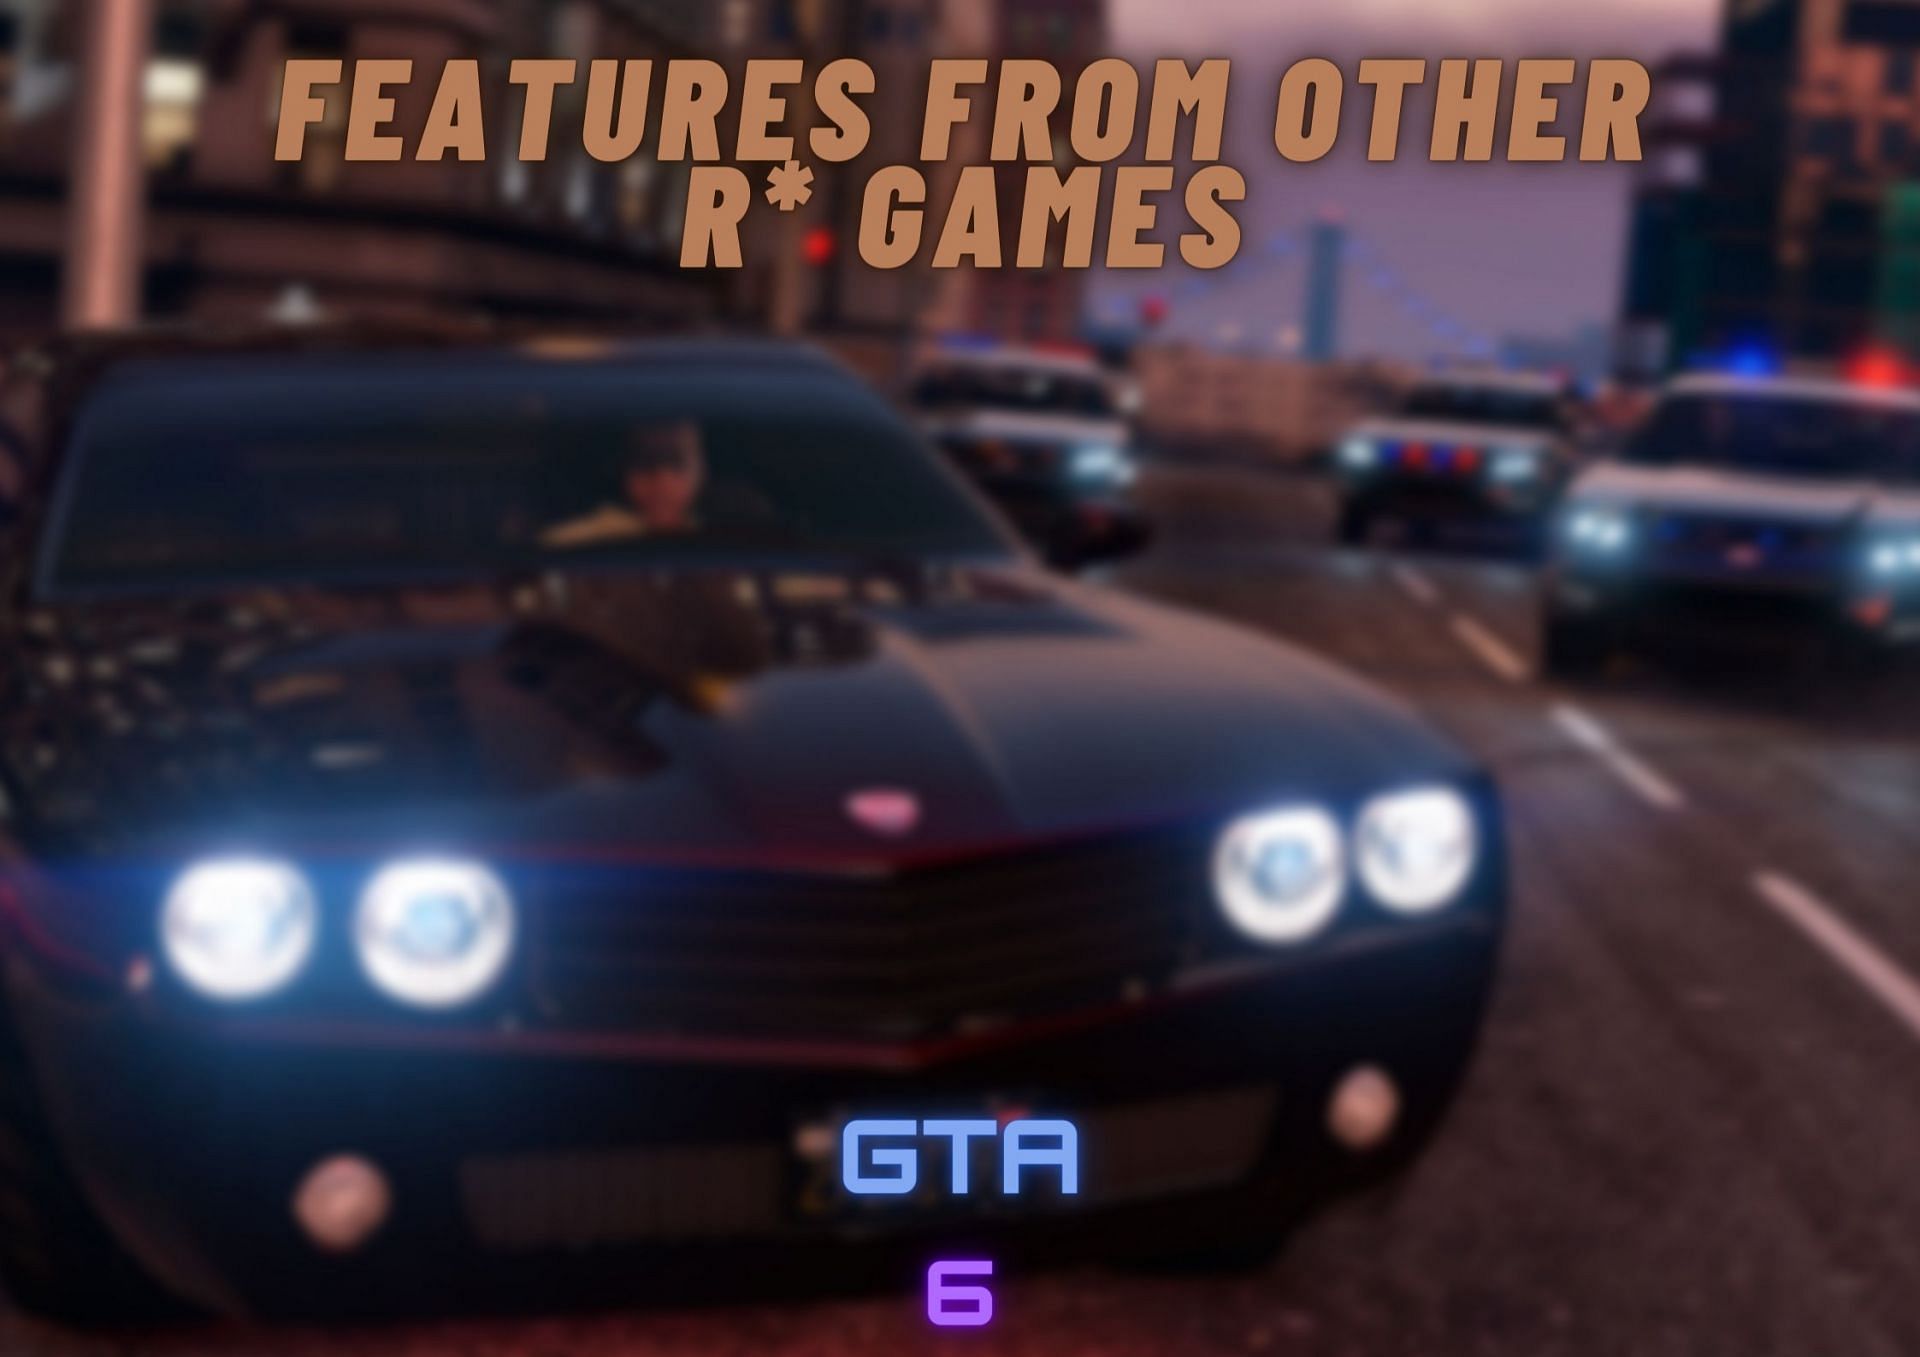 Will GTA 6 have fan-requested features from other R* games [Image via Sportskeeda]